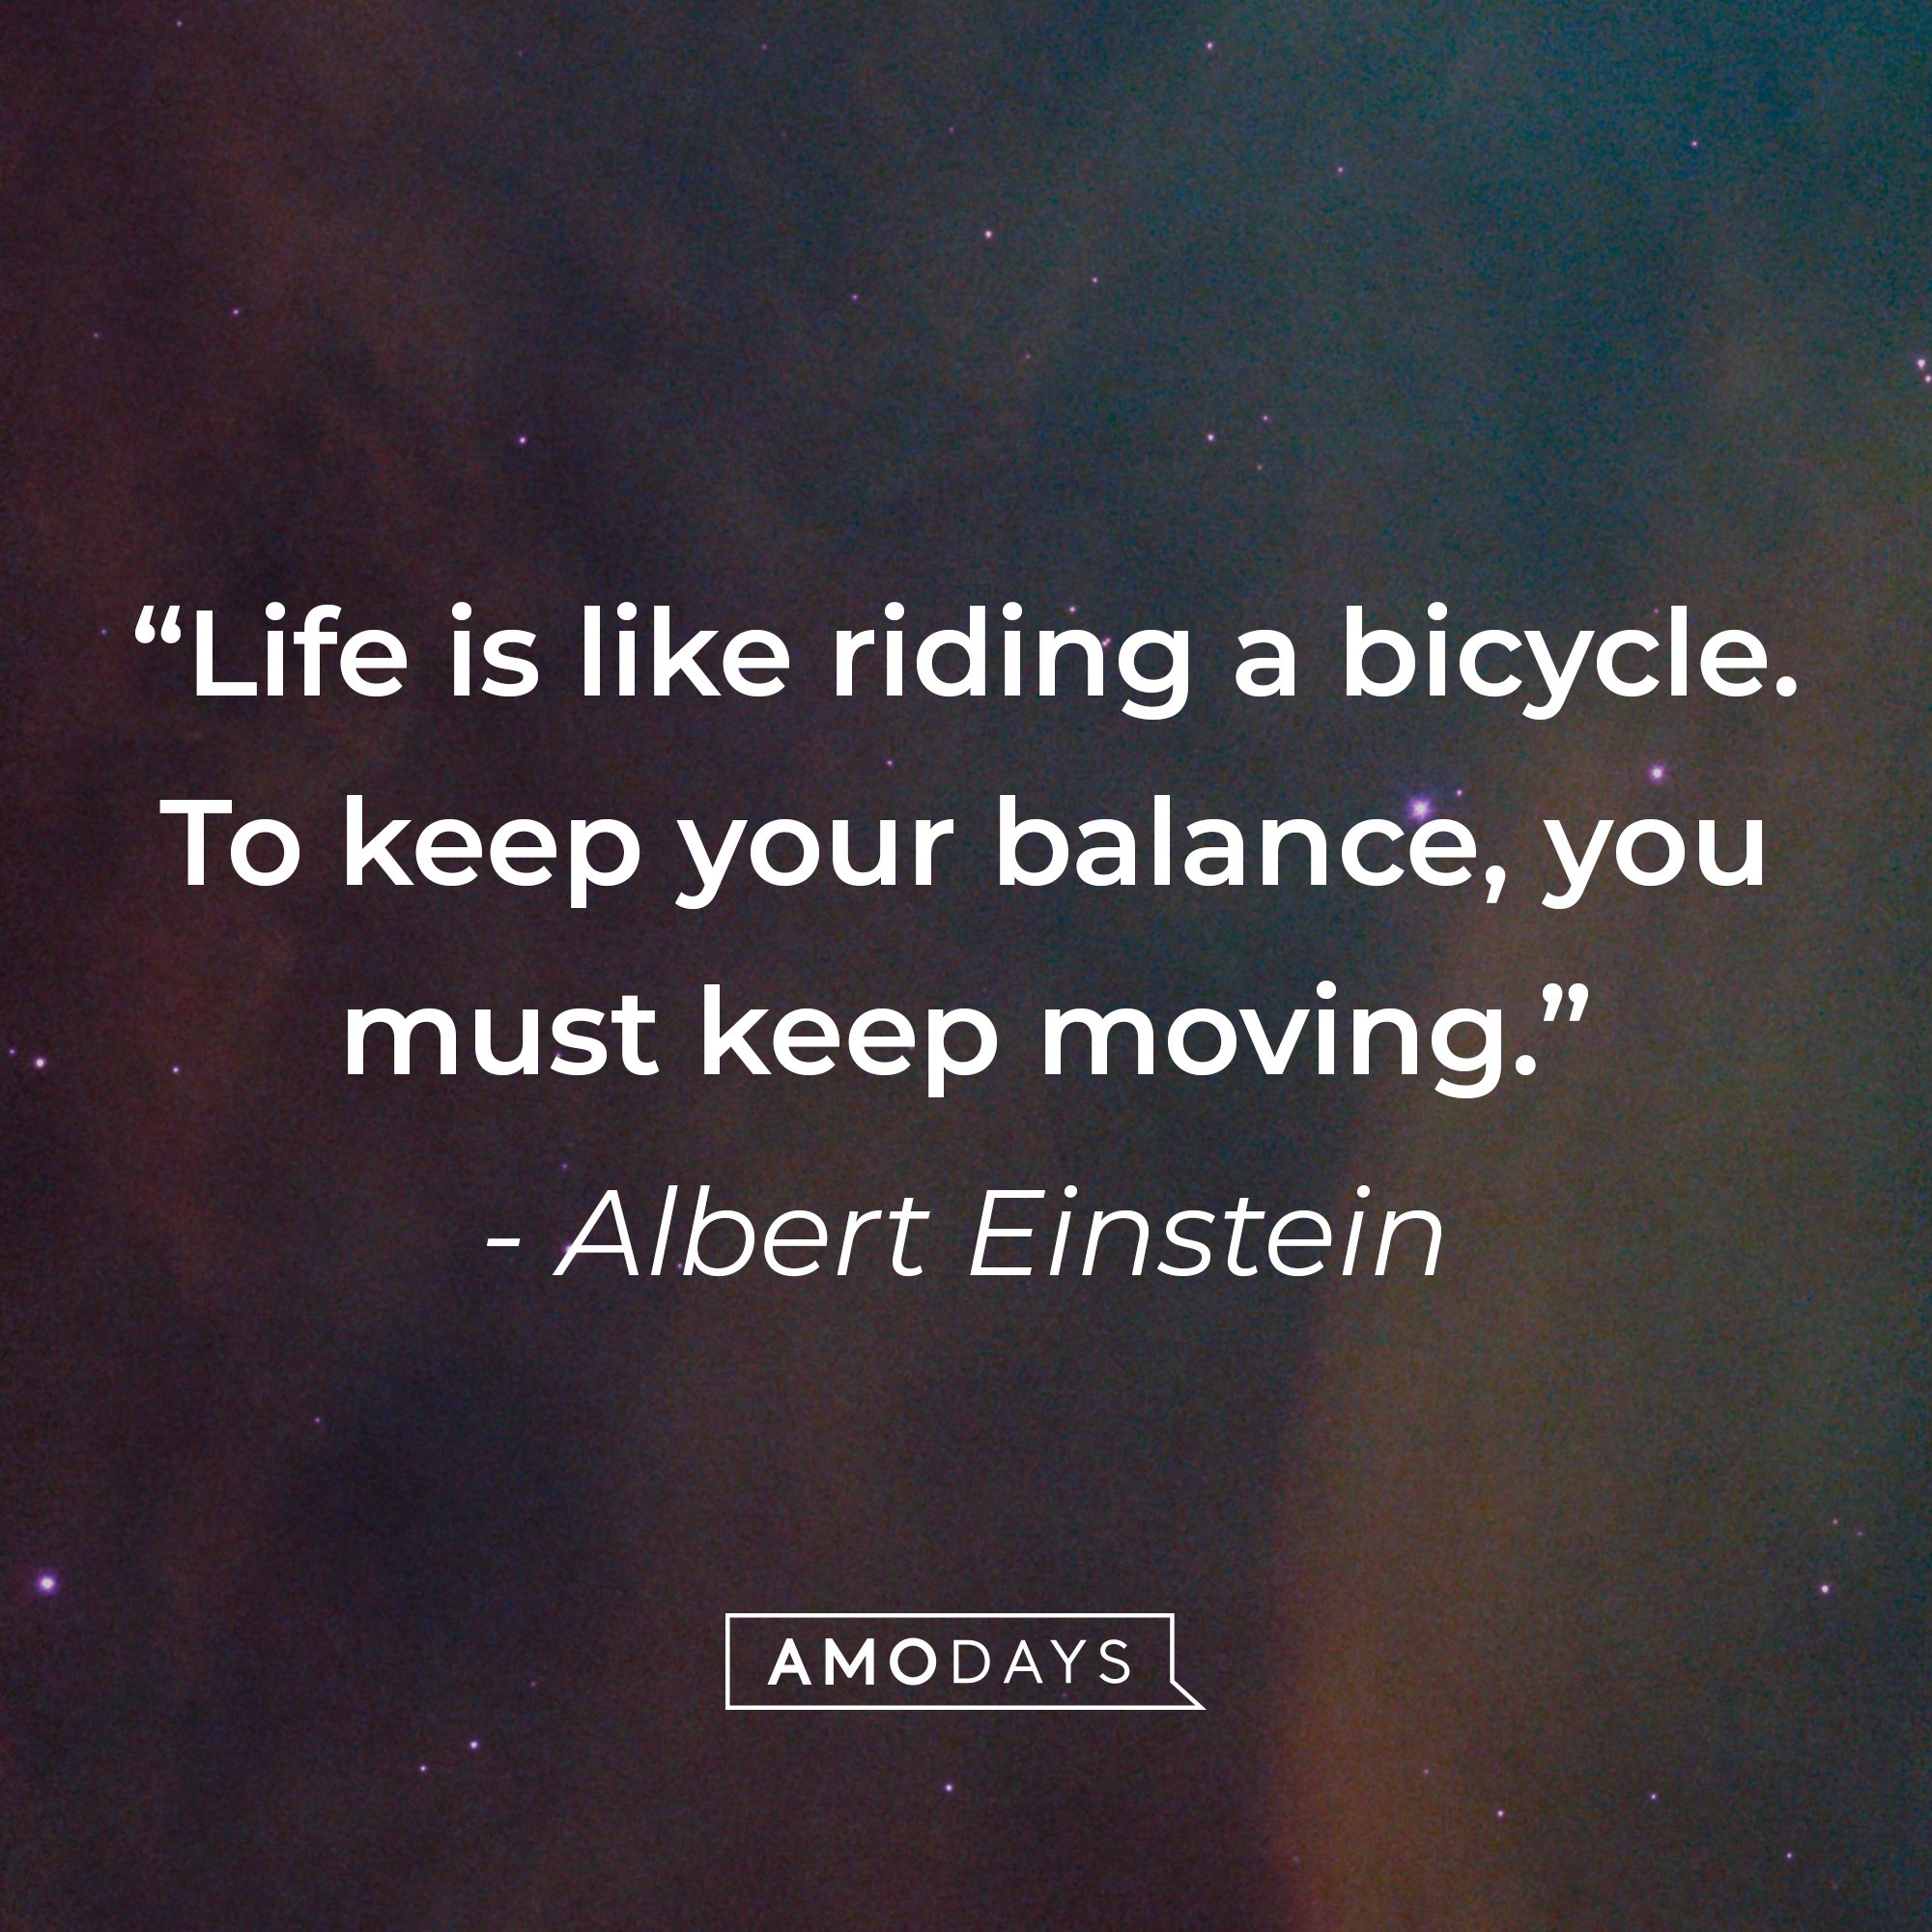 Albert Einstein's quote: "Life is like riding a bicycle. To keep your balance, you must keep moving." | Image: AmoDays